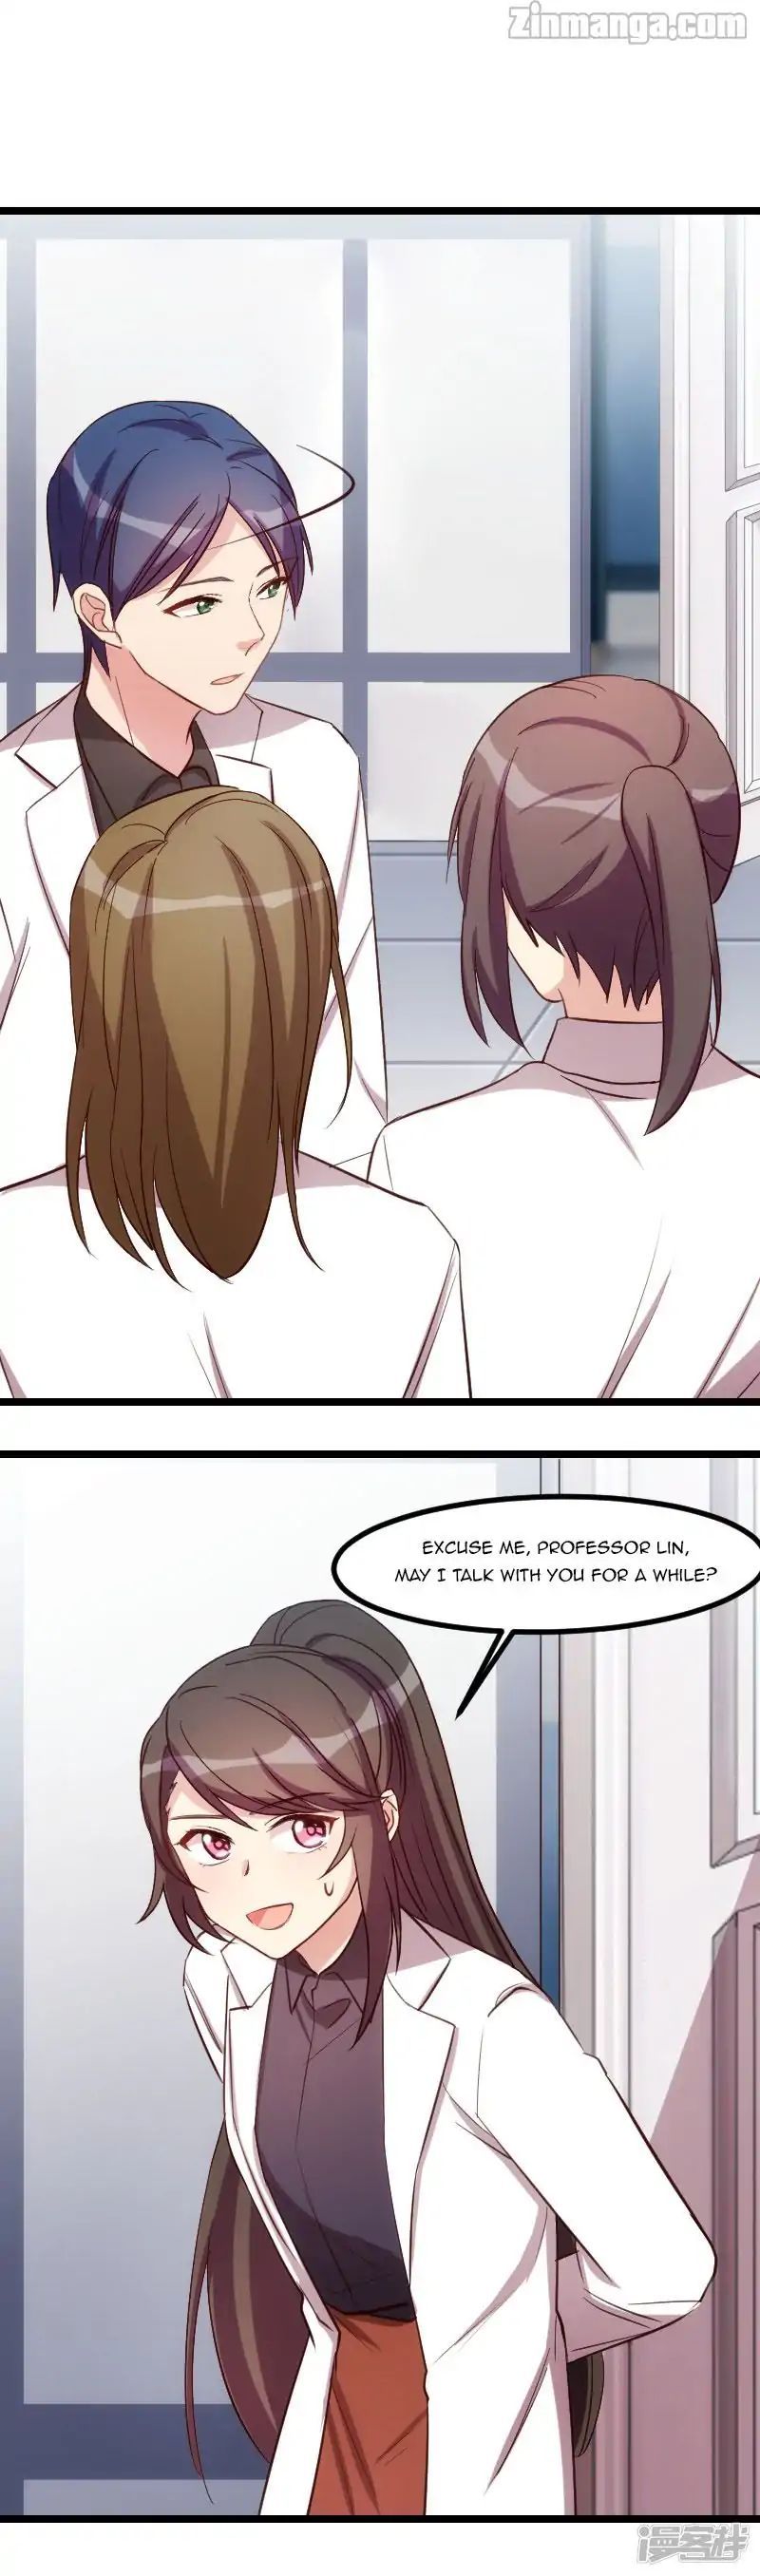 CEO's Sudden Proposal Chapter 185 page 6